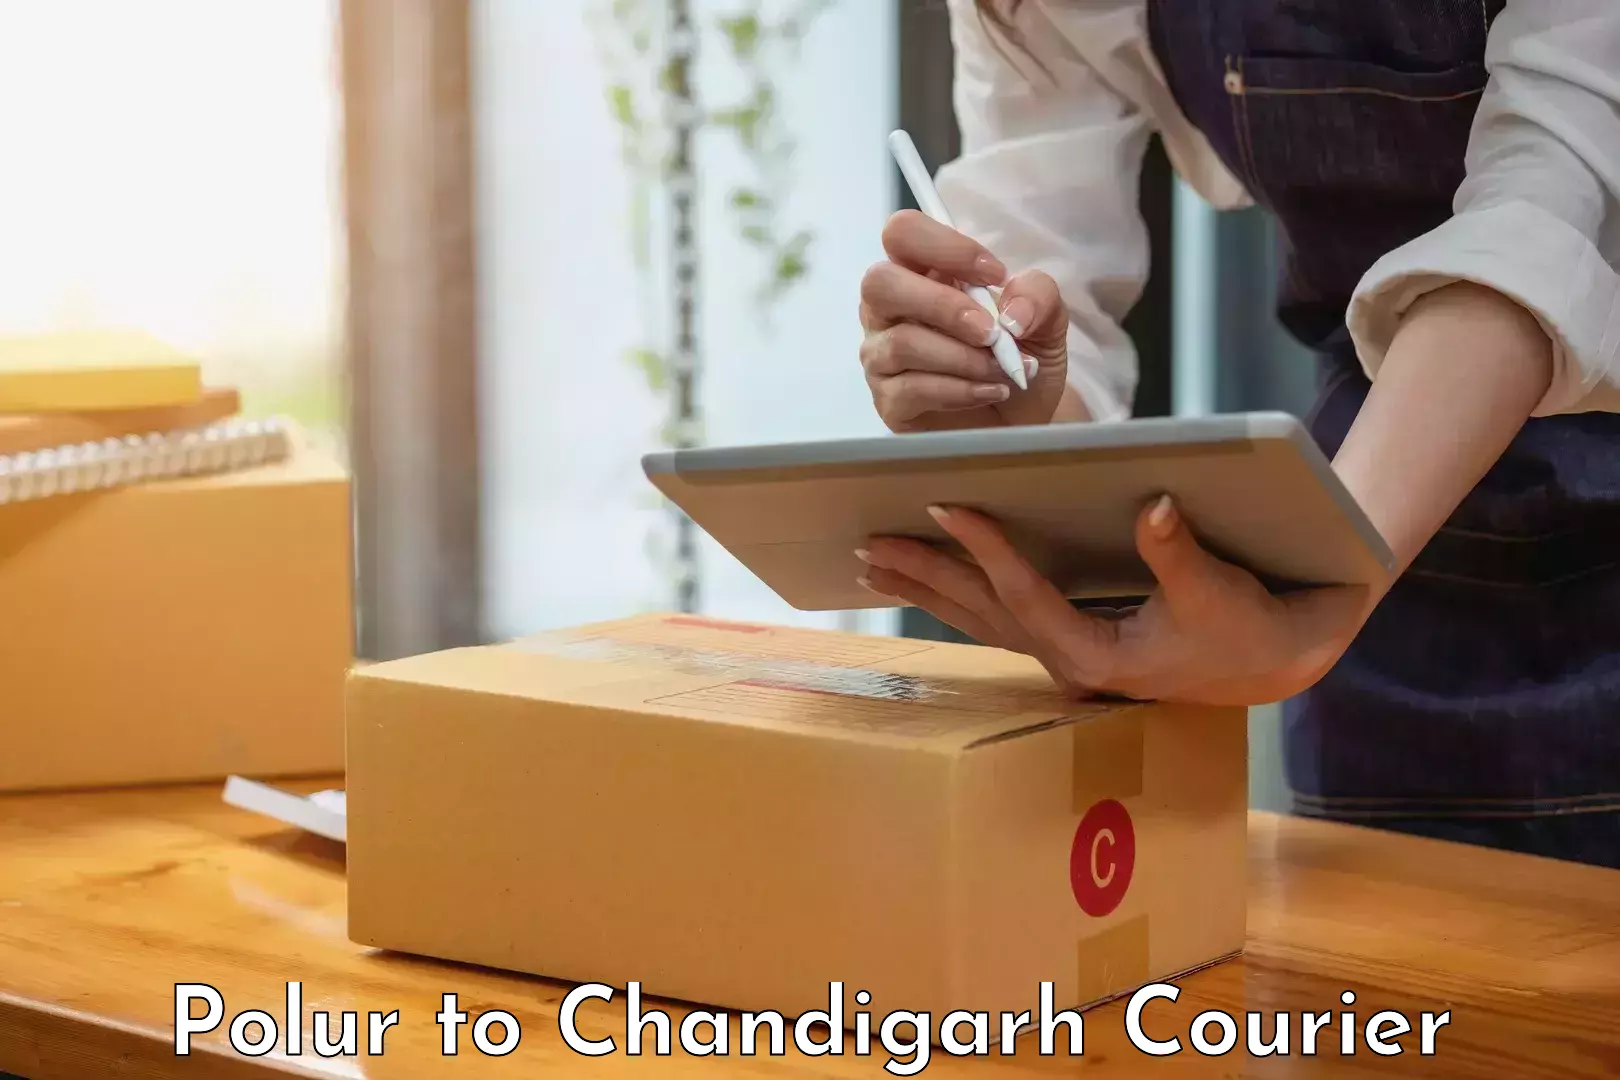 Bulk courier orders Polur to Chandigarh